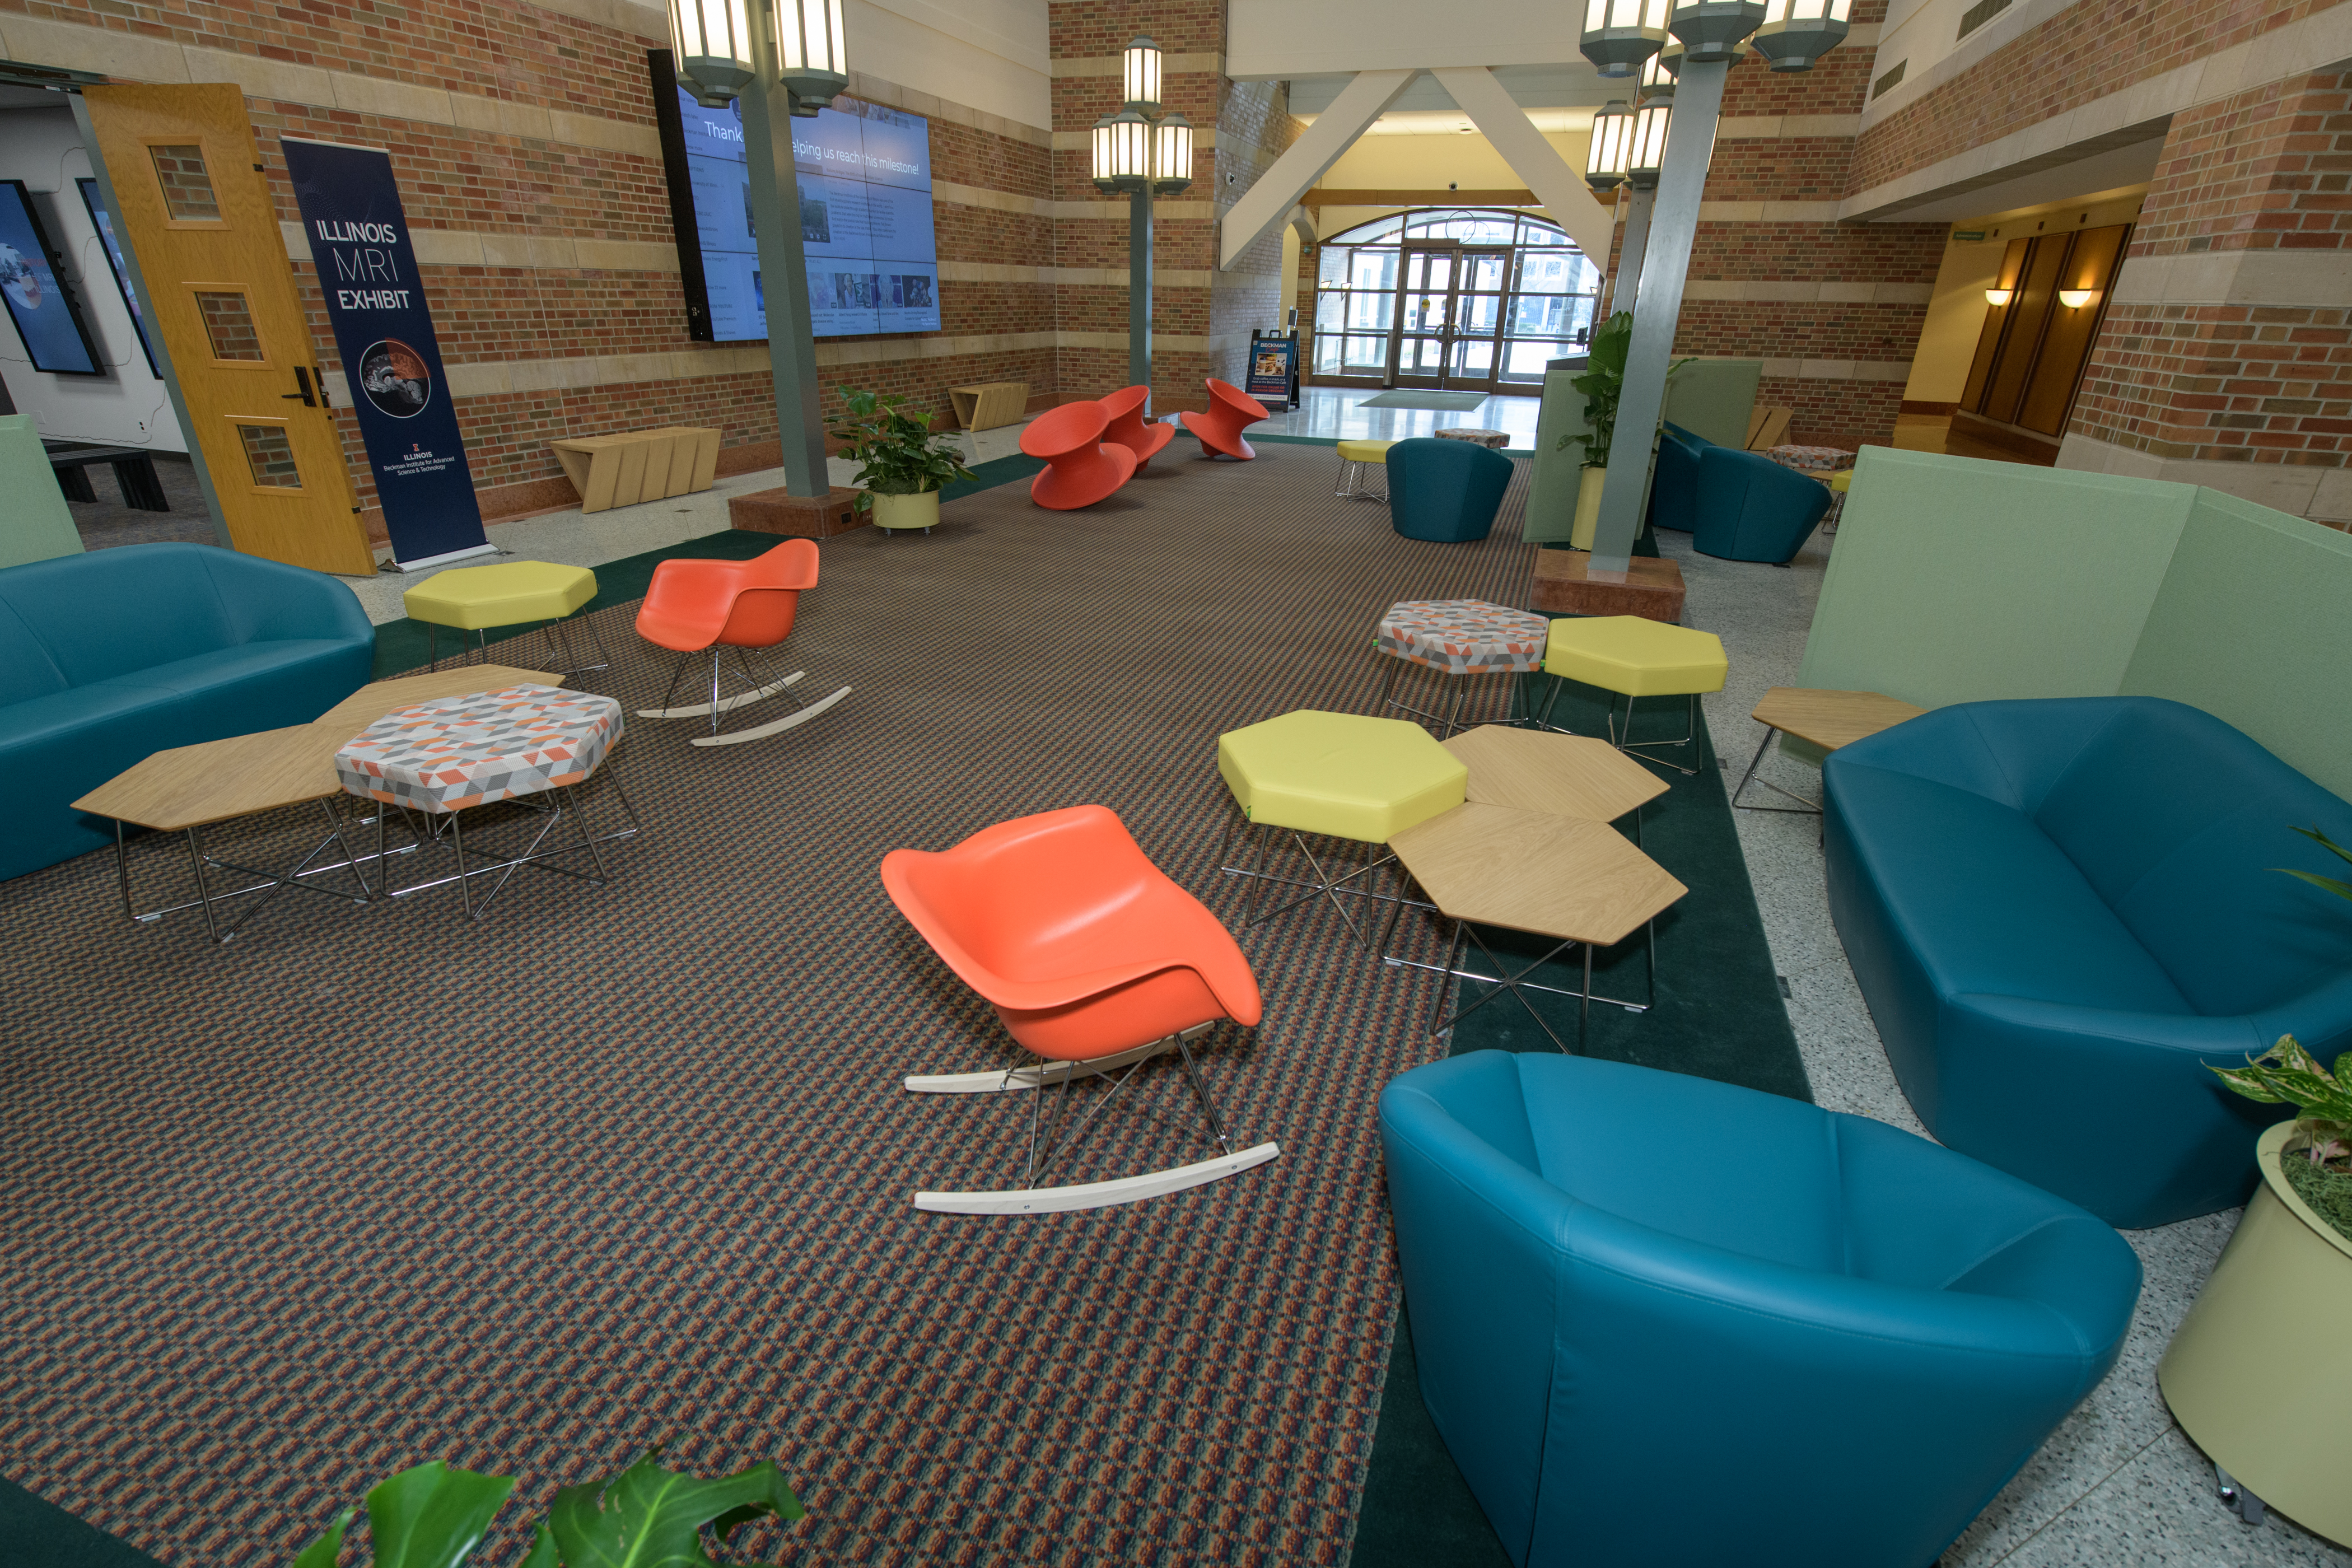 Interactive furniture makes the Beckman Atrium a fun, colorful Zoom background.